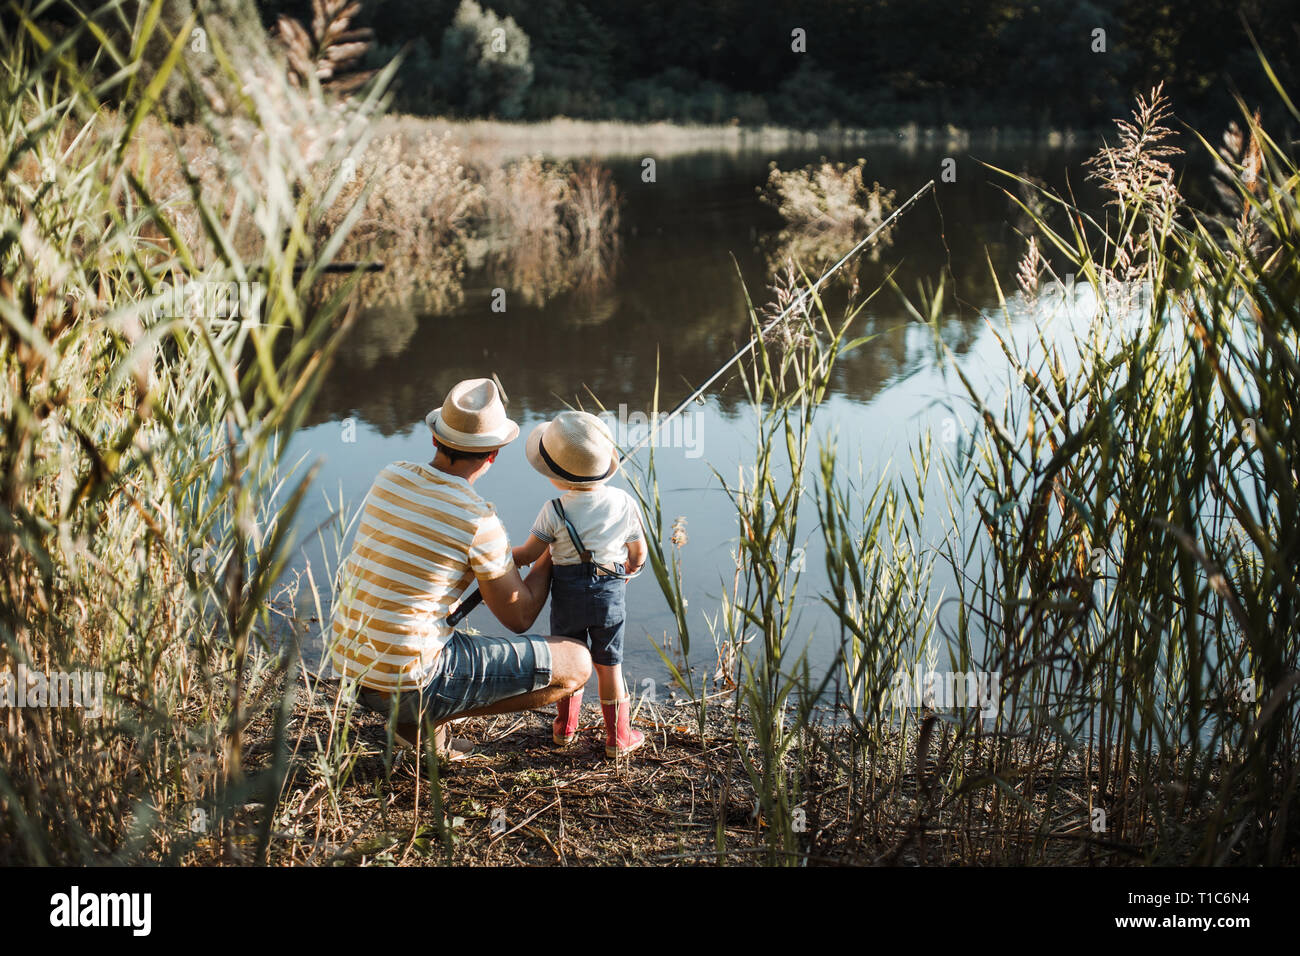 A rear view of mature father with a small toddler son outdoors fishing by a lake. Stock Photo